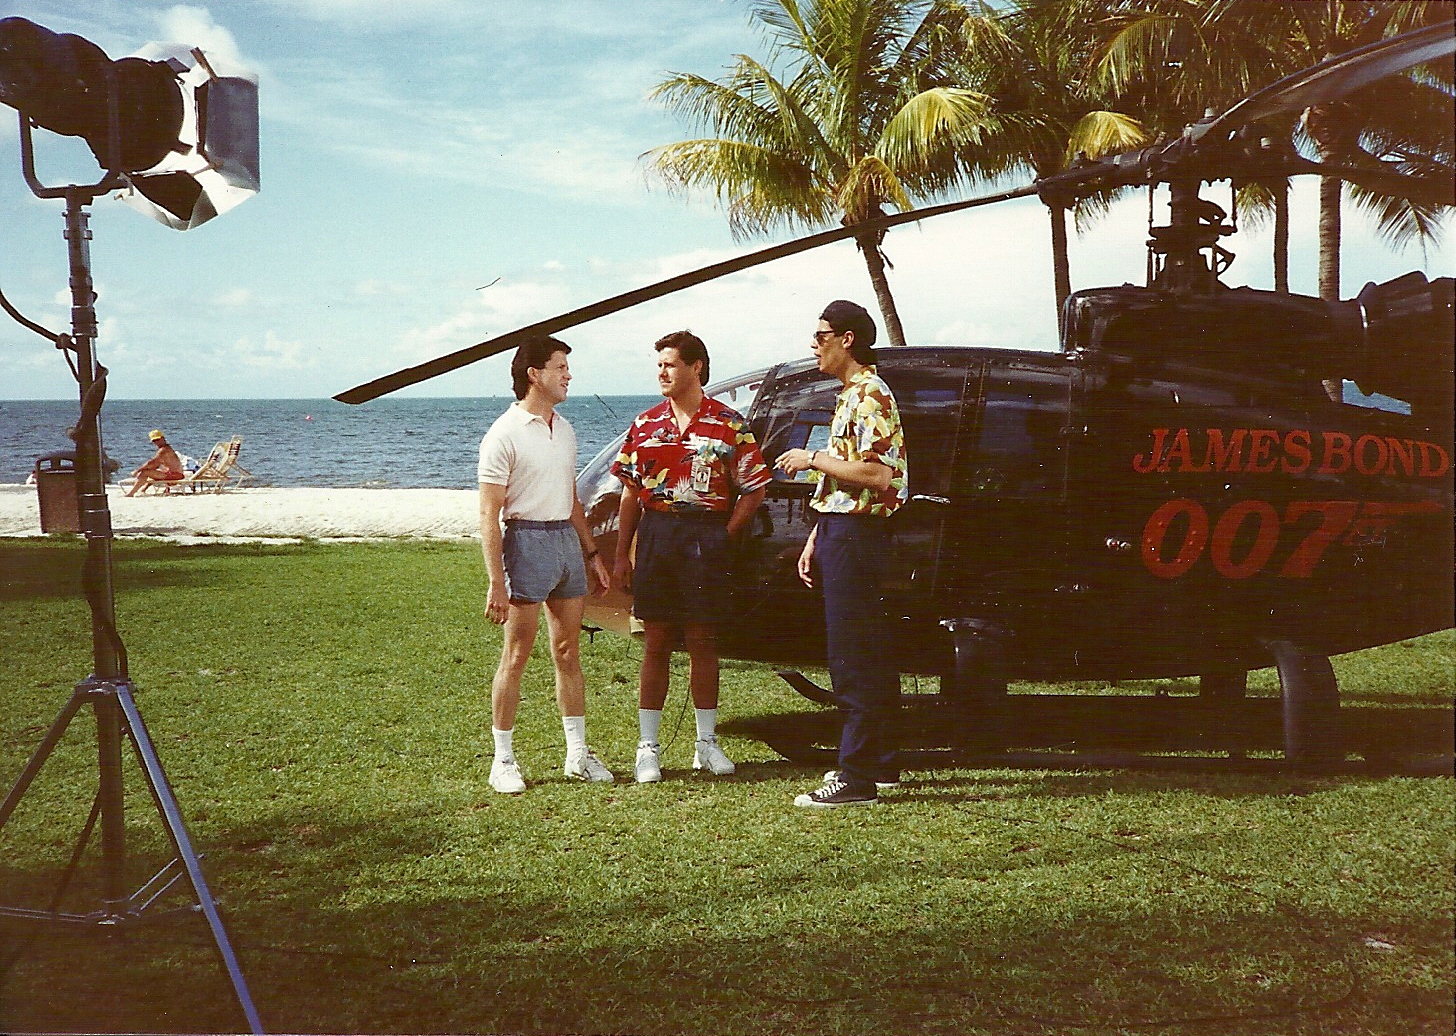 Academy Award Winner Bencio Del Toro interviewed by the McCain Brothers in Key West, Florida for Good Morning Oklahoma.